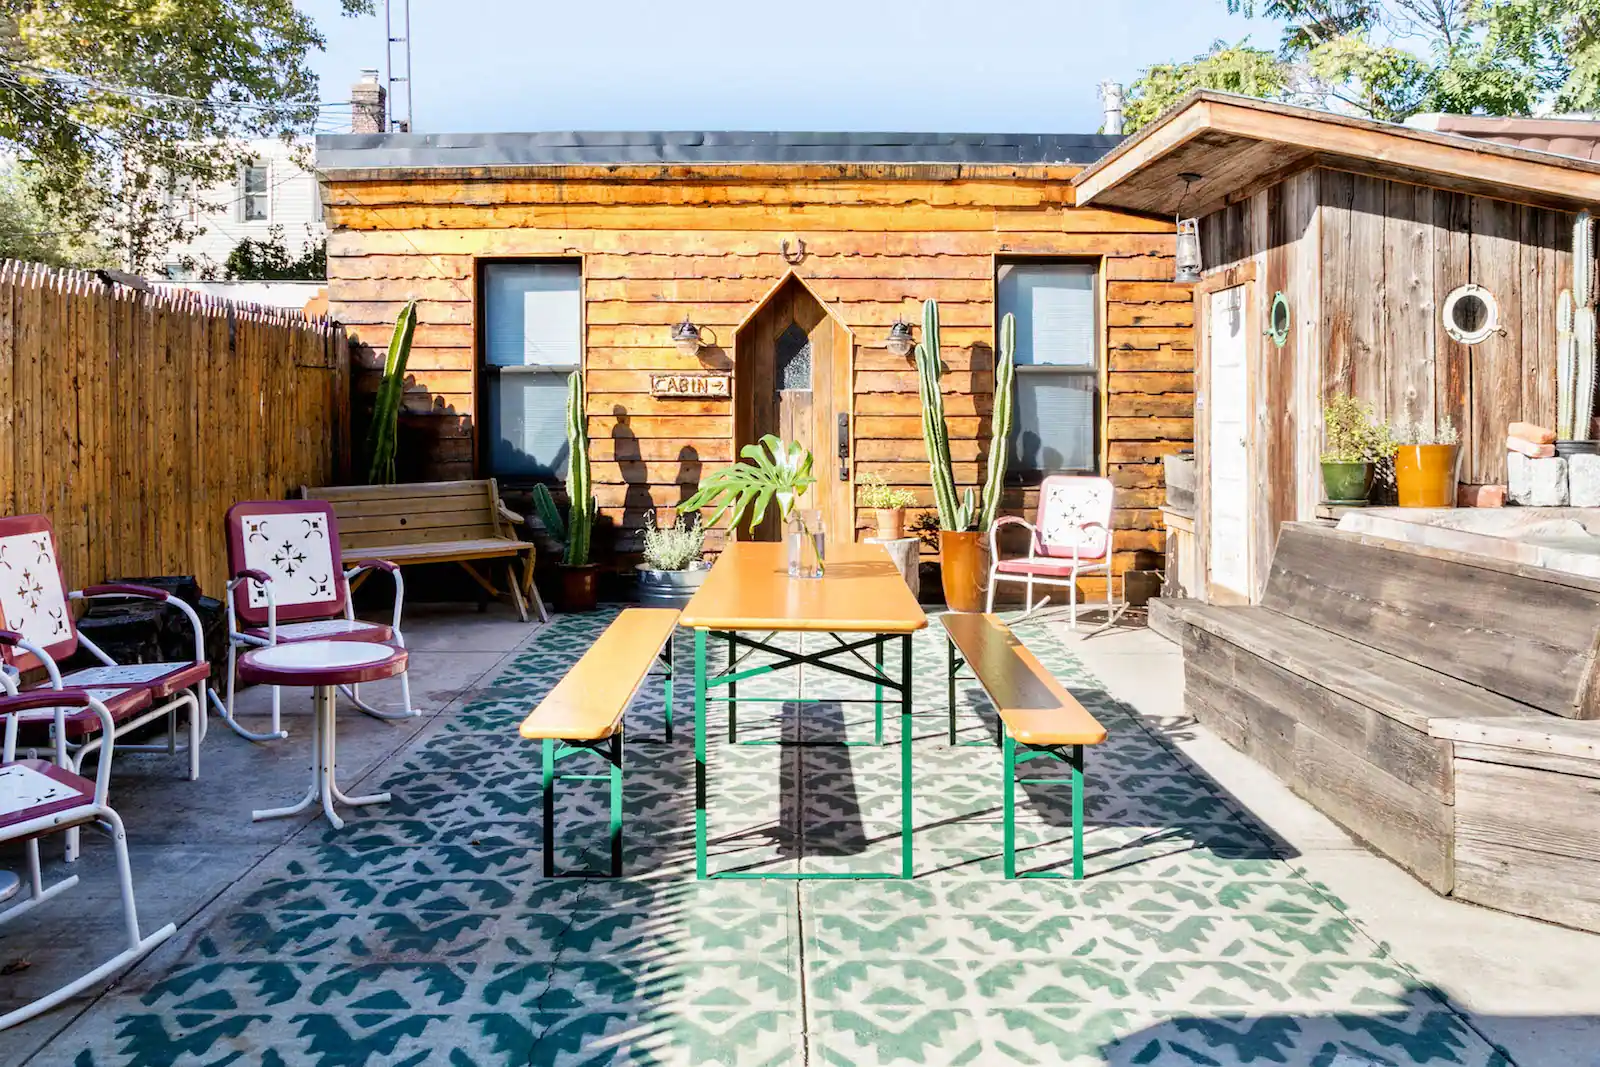 Fenced in back patio area of Urban Cowboy Brooklyn. Green tile cuts a pattern on the ground, with chairs scattered around the table and bench.